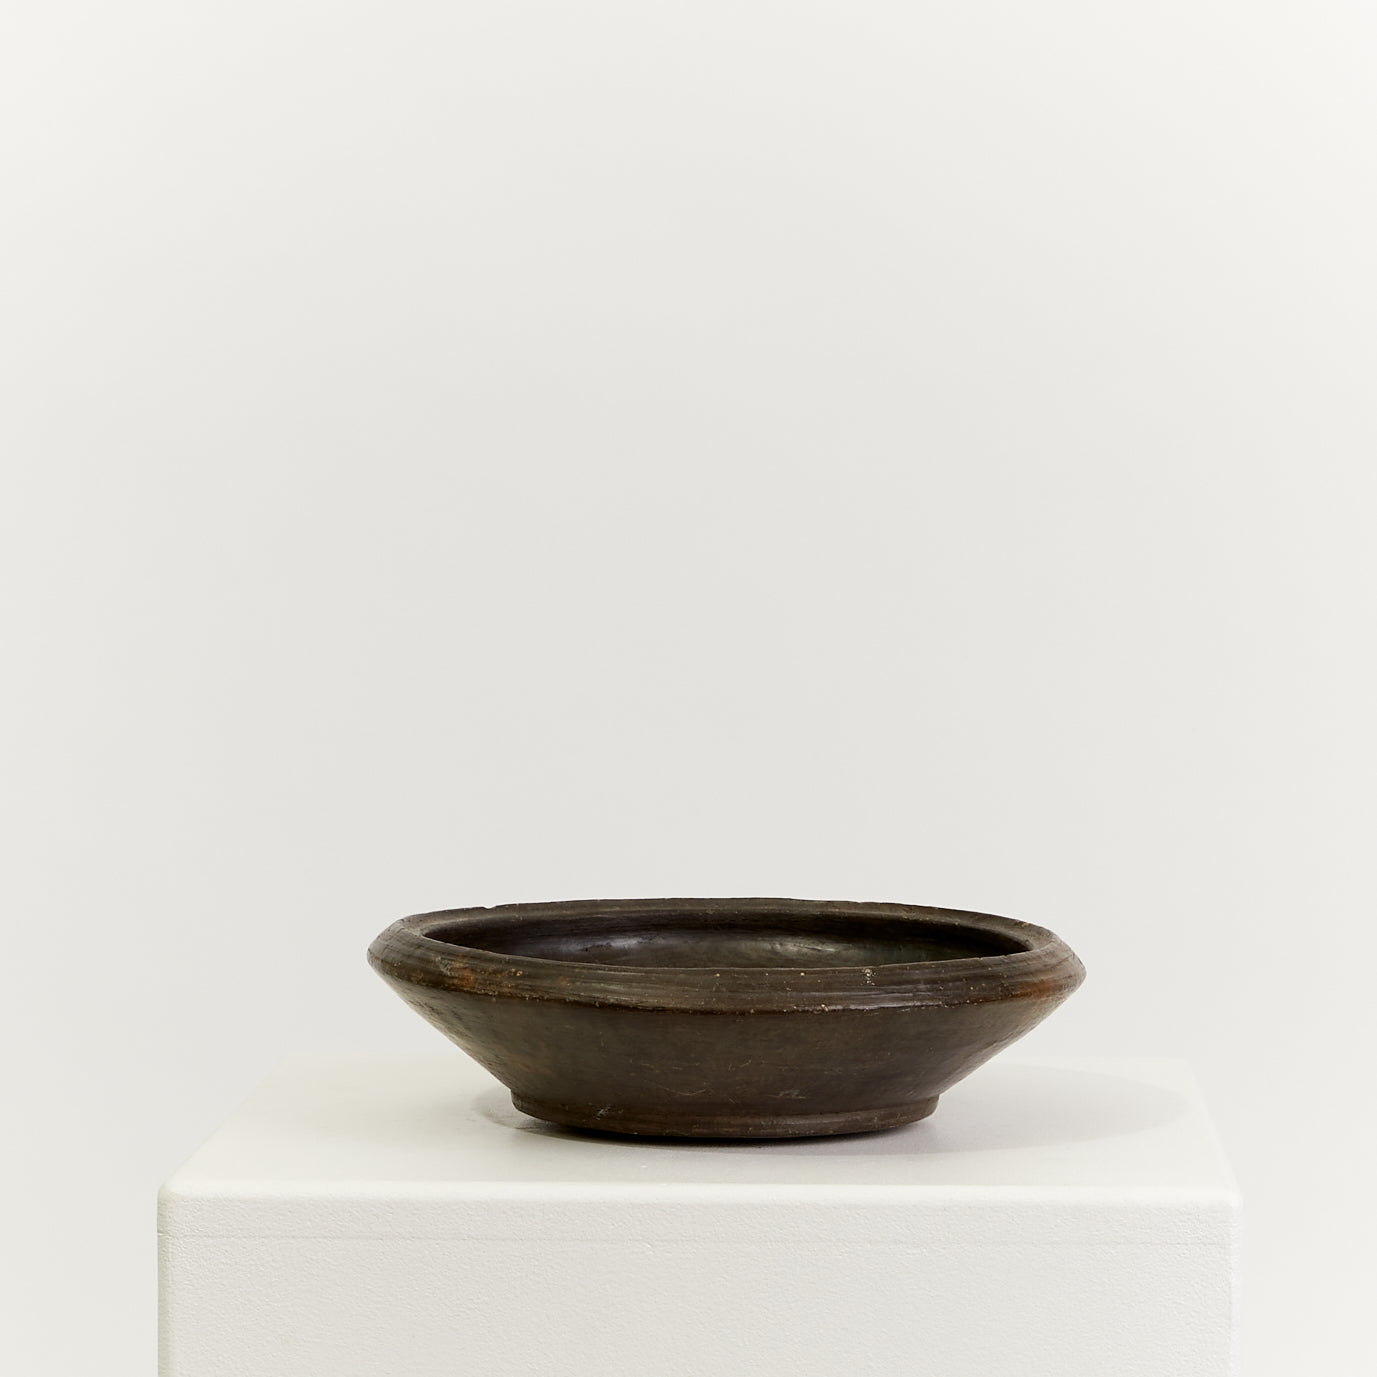 Black ceramic bowl - HIRE ONLY